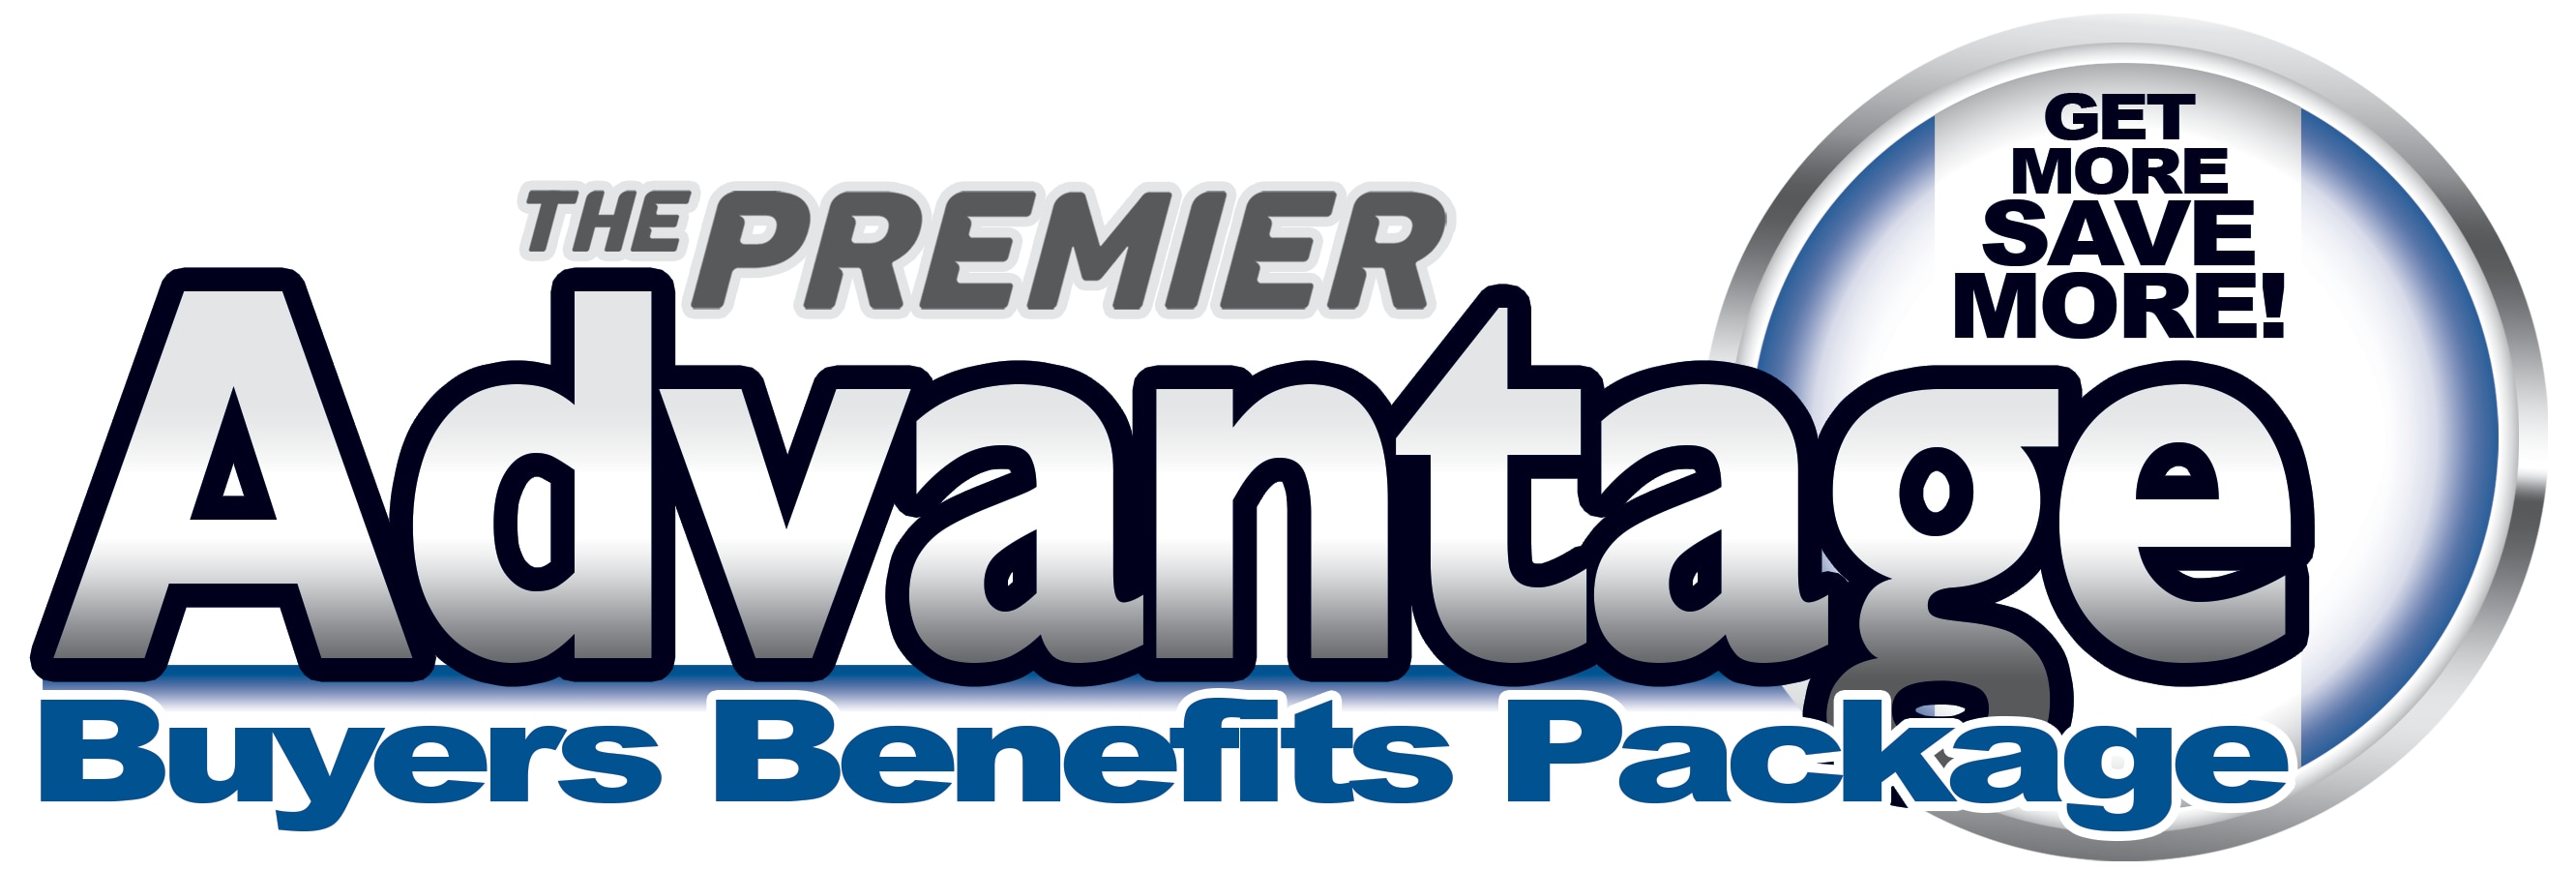 Get the Buyers Benefits package only at Premier Subaru